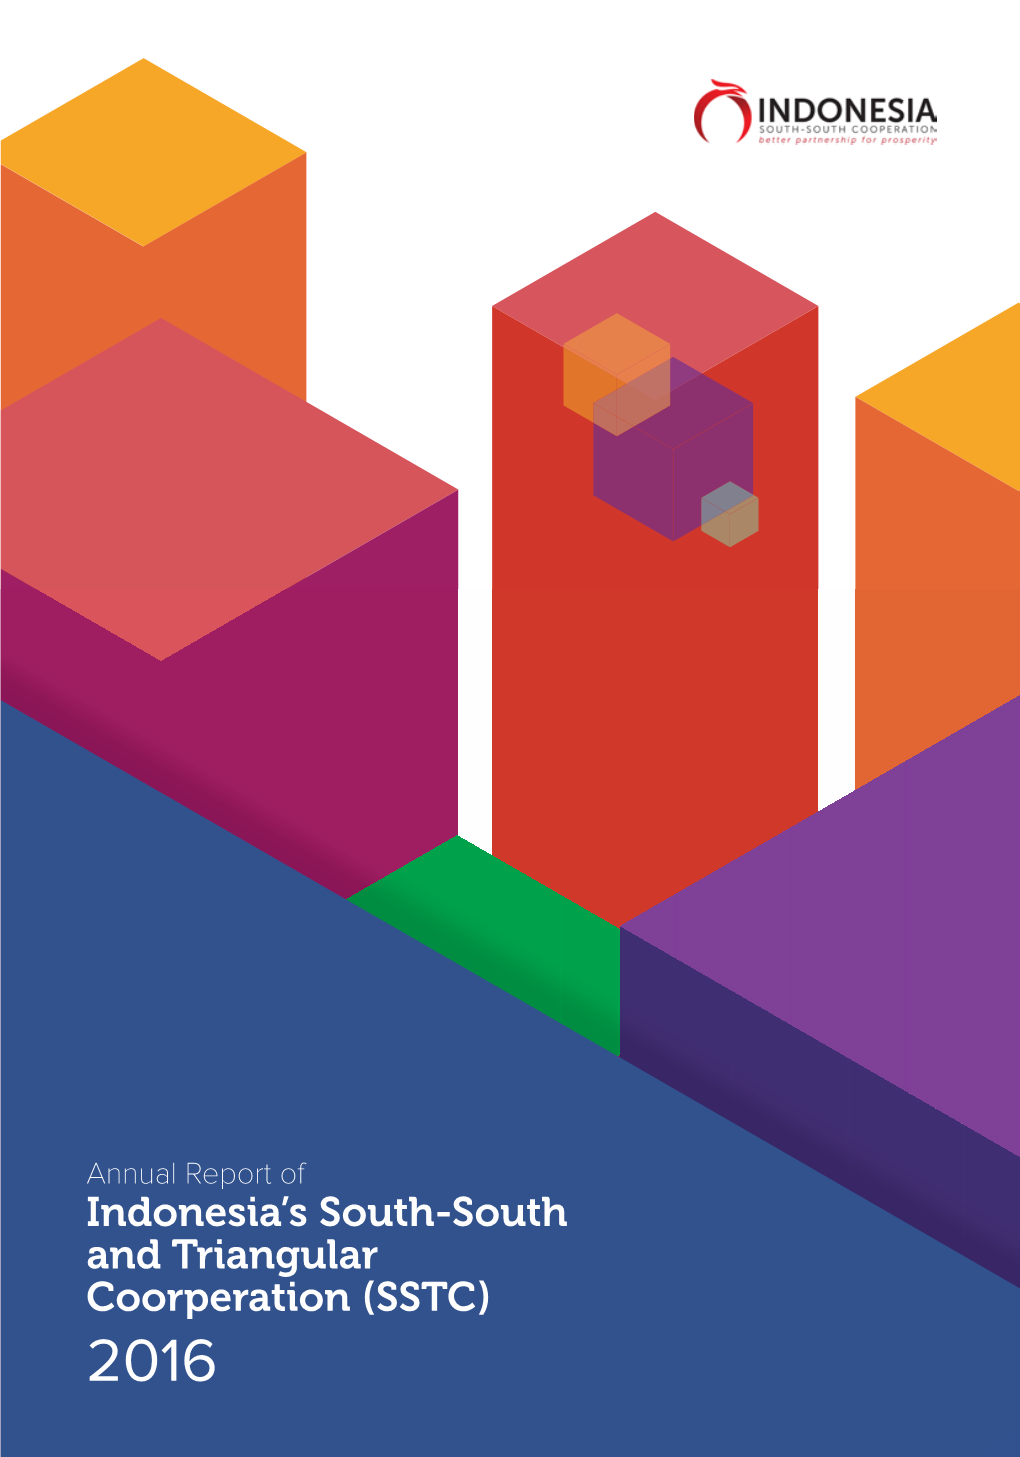 Indonesia's South-South and Triangular Coorperation (SSTC)